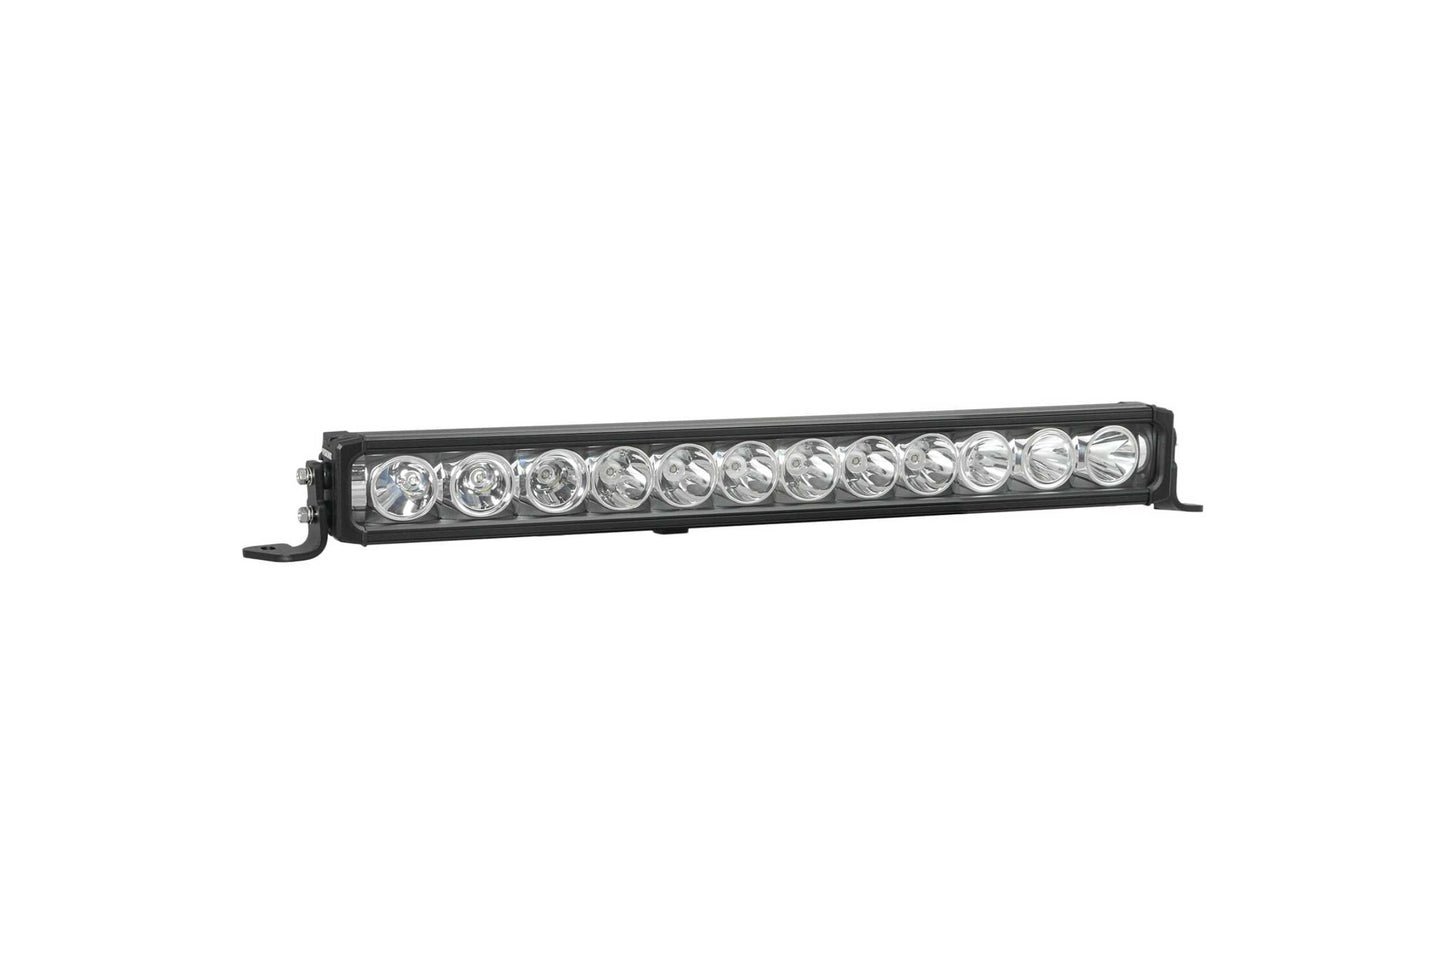 Vision X Light Bar: 19in (9-LED / XPR / Mixed Beam)